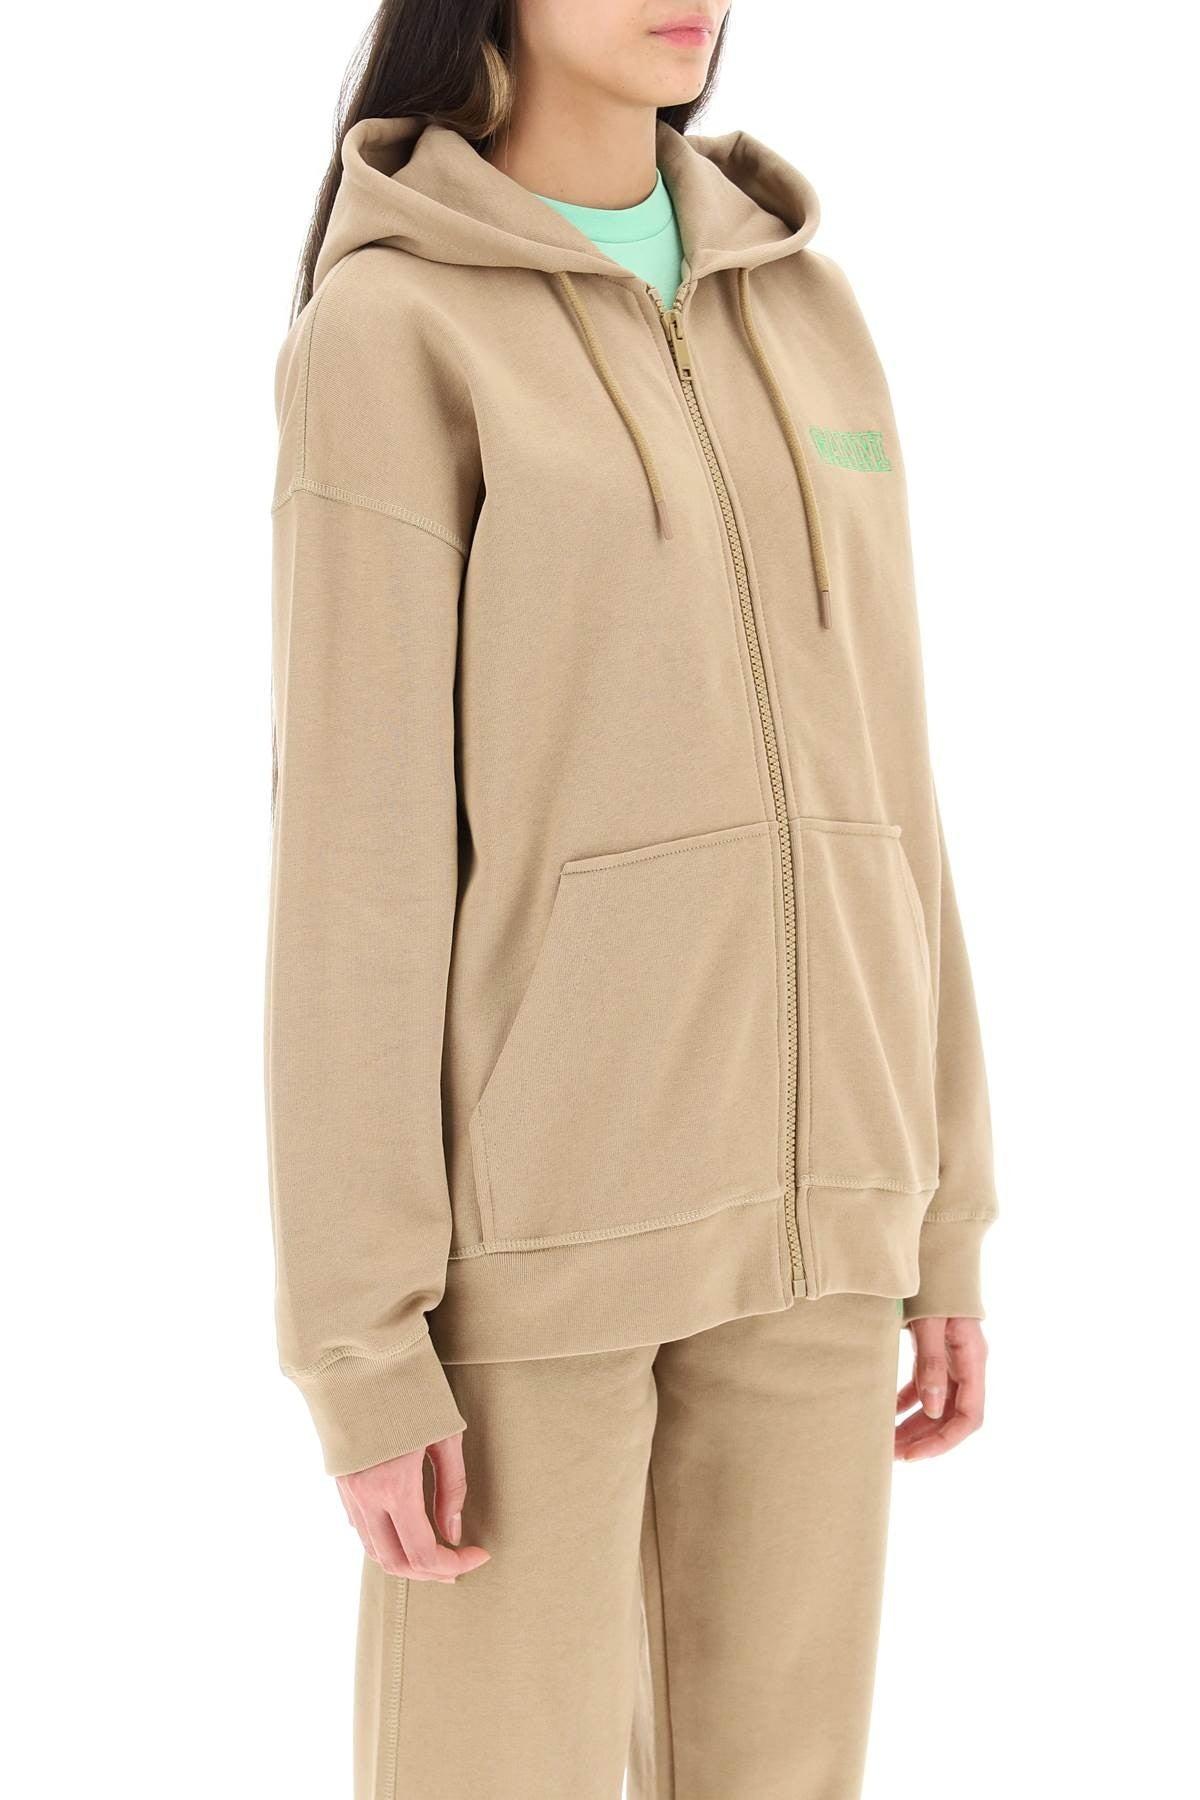 Ganni Logo Embroidery Zip-up Hoodie in Natural | Lyst